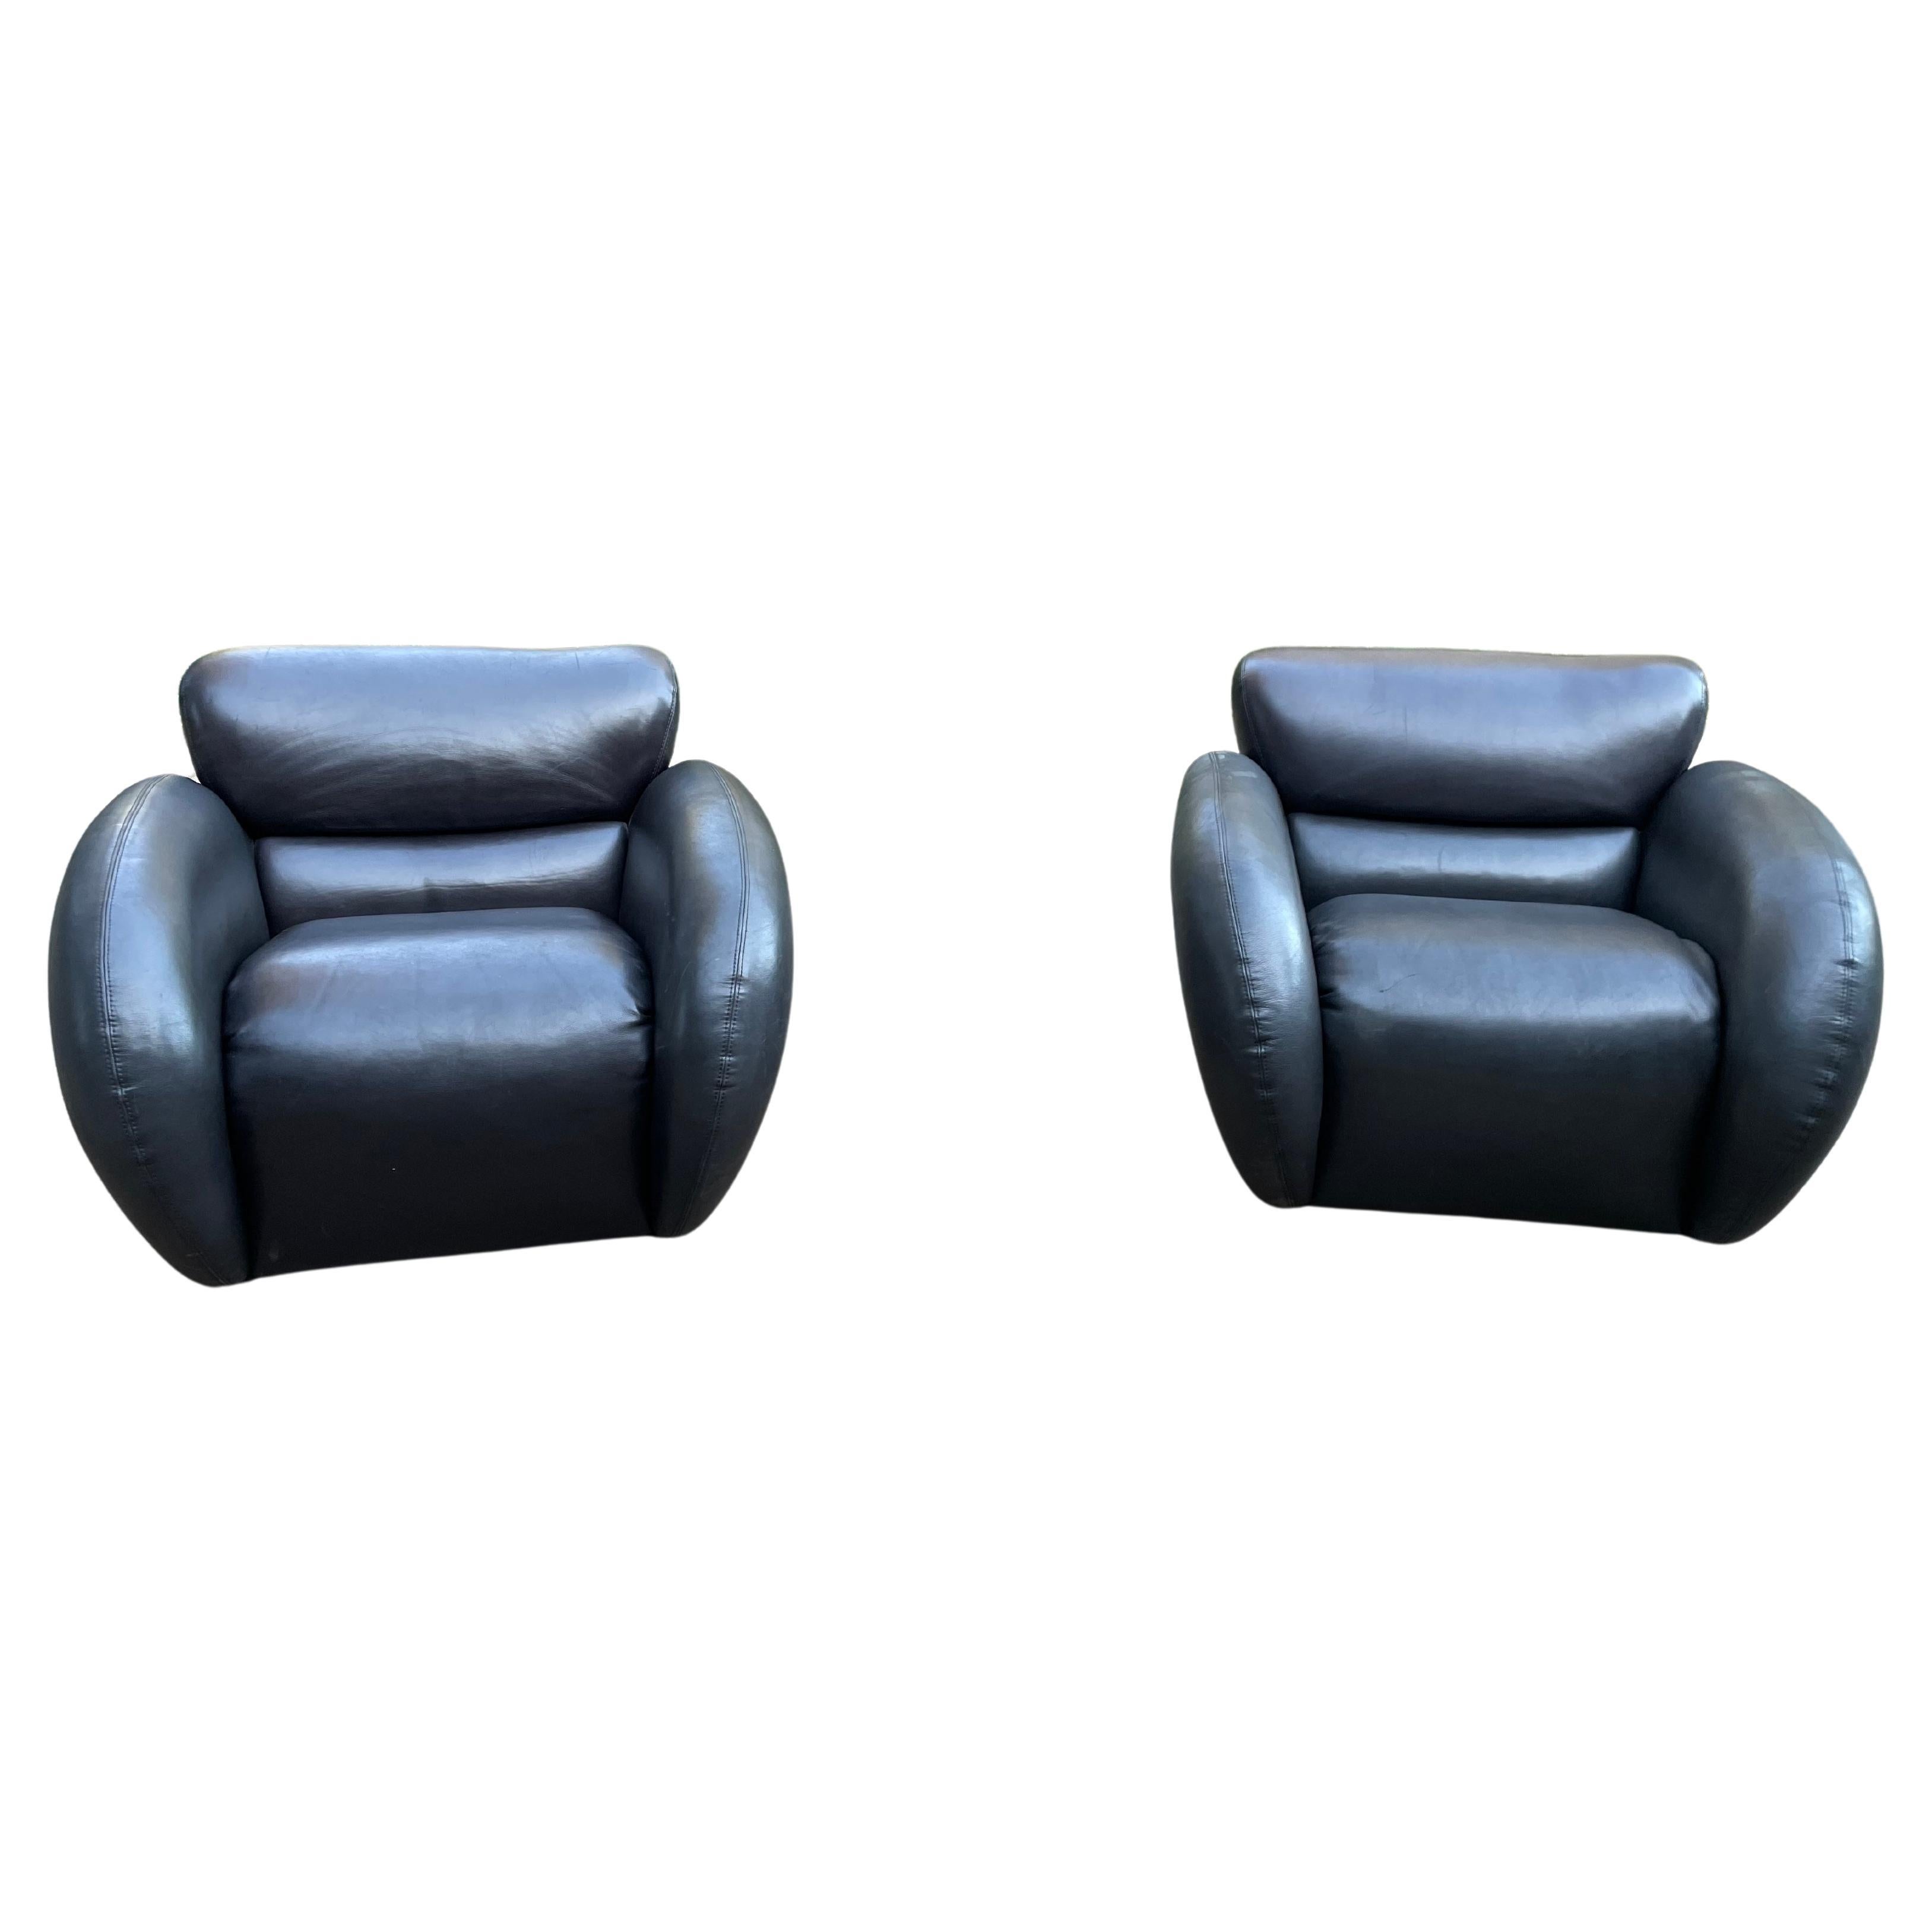 Late 20th Century Large Scale Leather Swivel Lounge Chairs for Directional For Sale